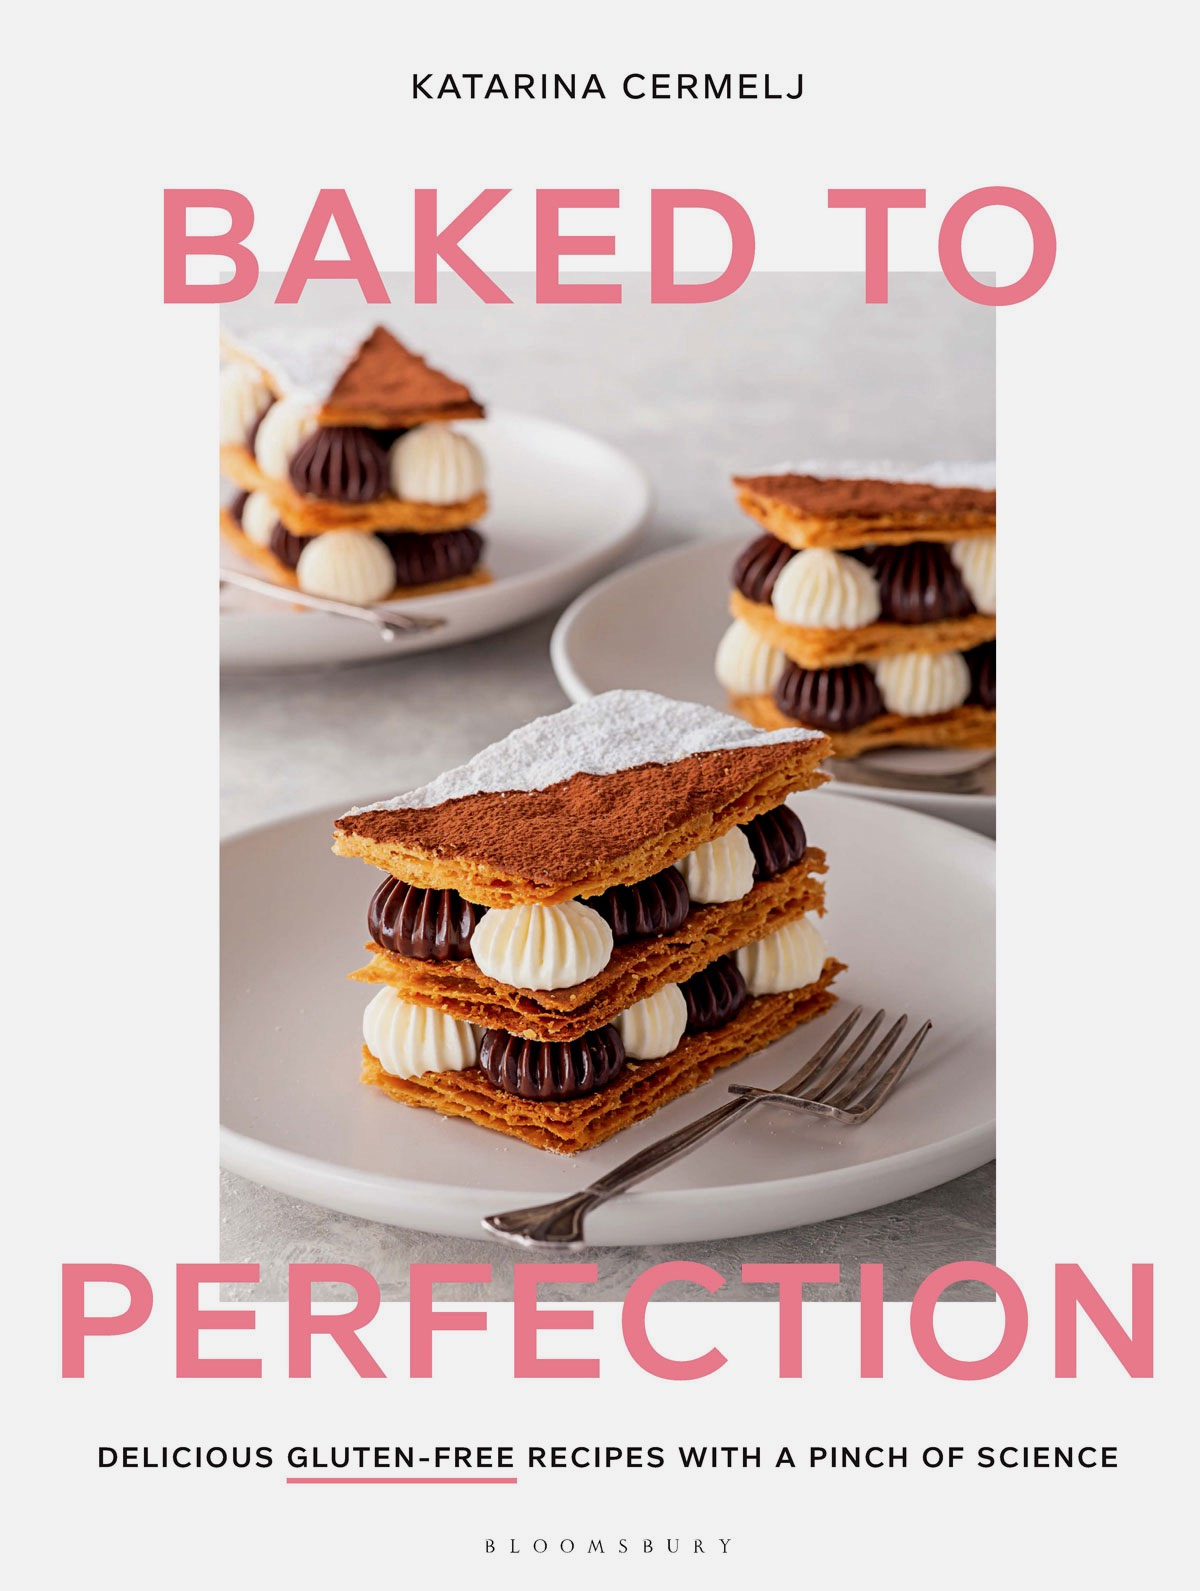 Book cover of Baked To Perfection by Katarina Cermelj